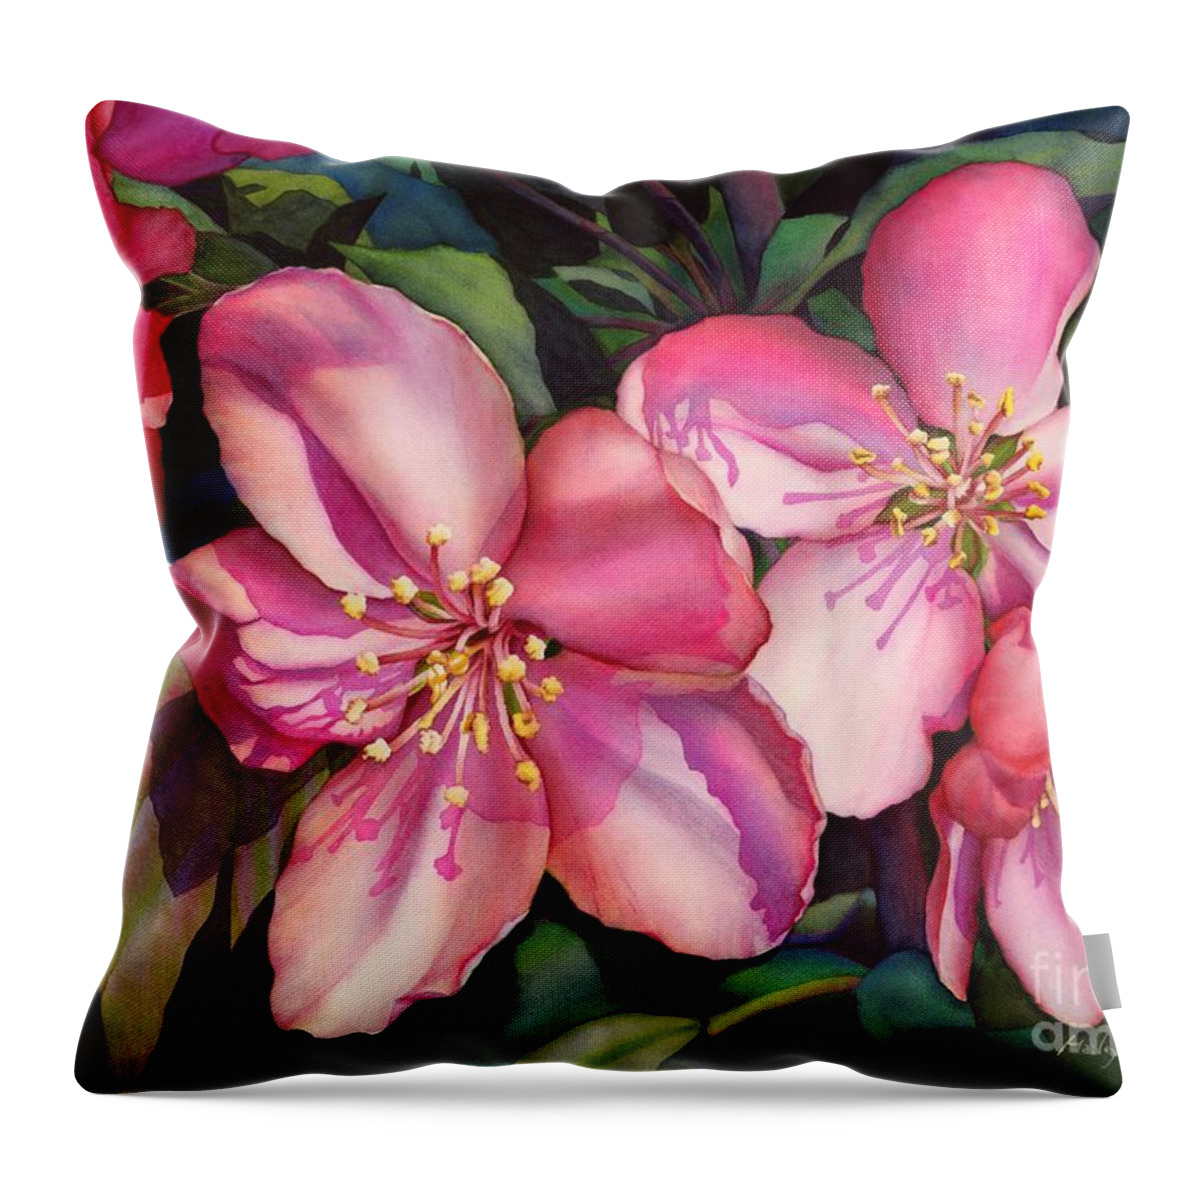 Spring Throw Pillow featuring the painting Spring Blossoms by Hailey E Herrera